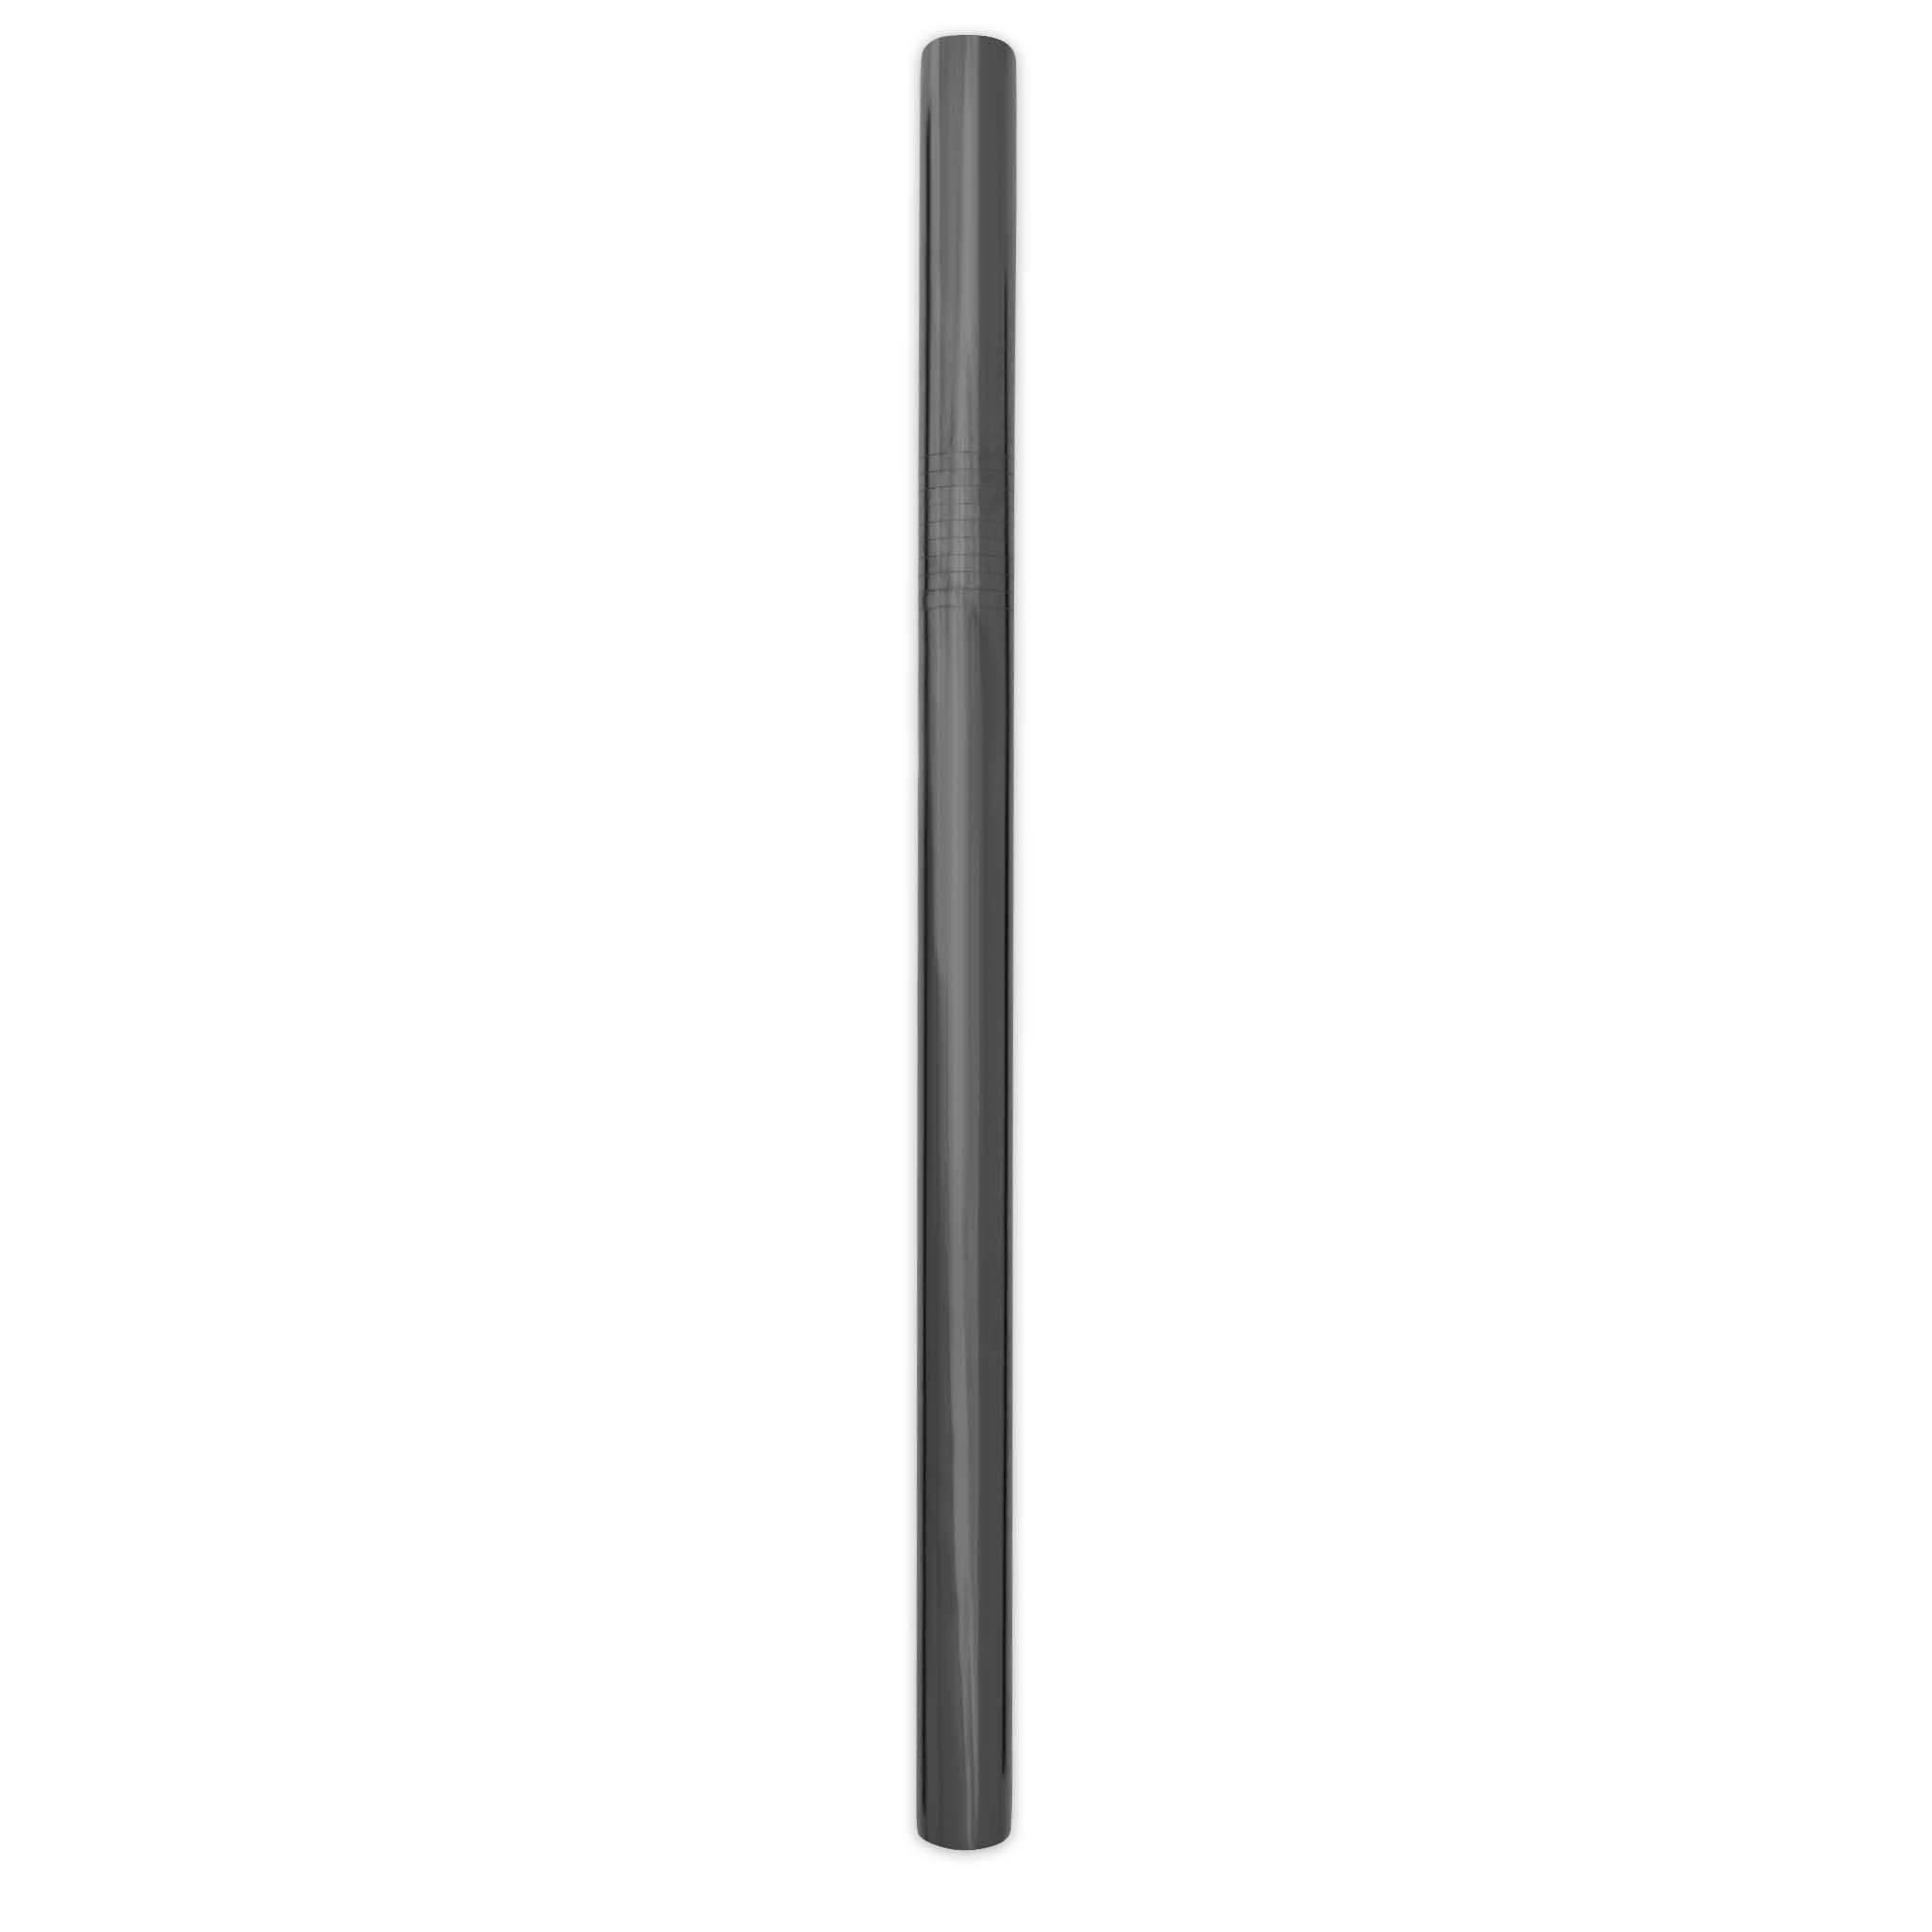 Reusable Stainless Steel Smoothie Straw (Black)